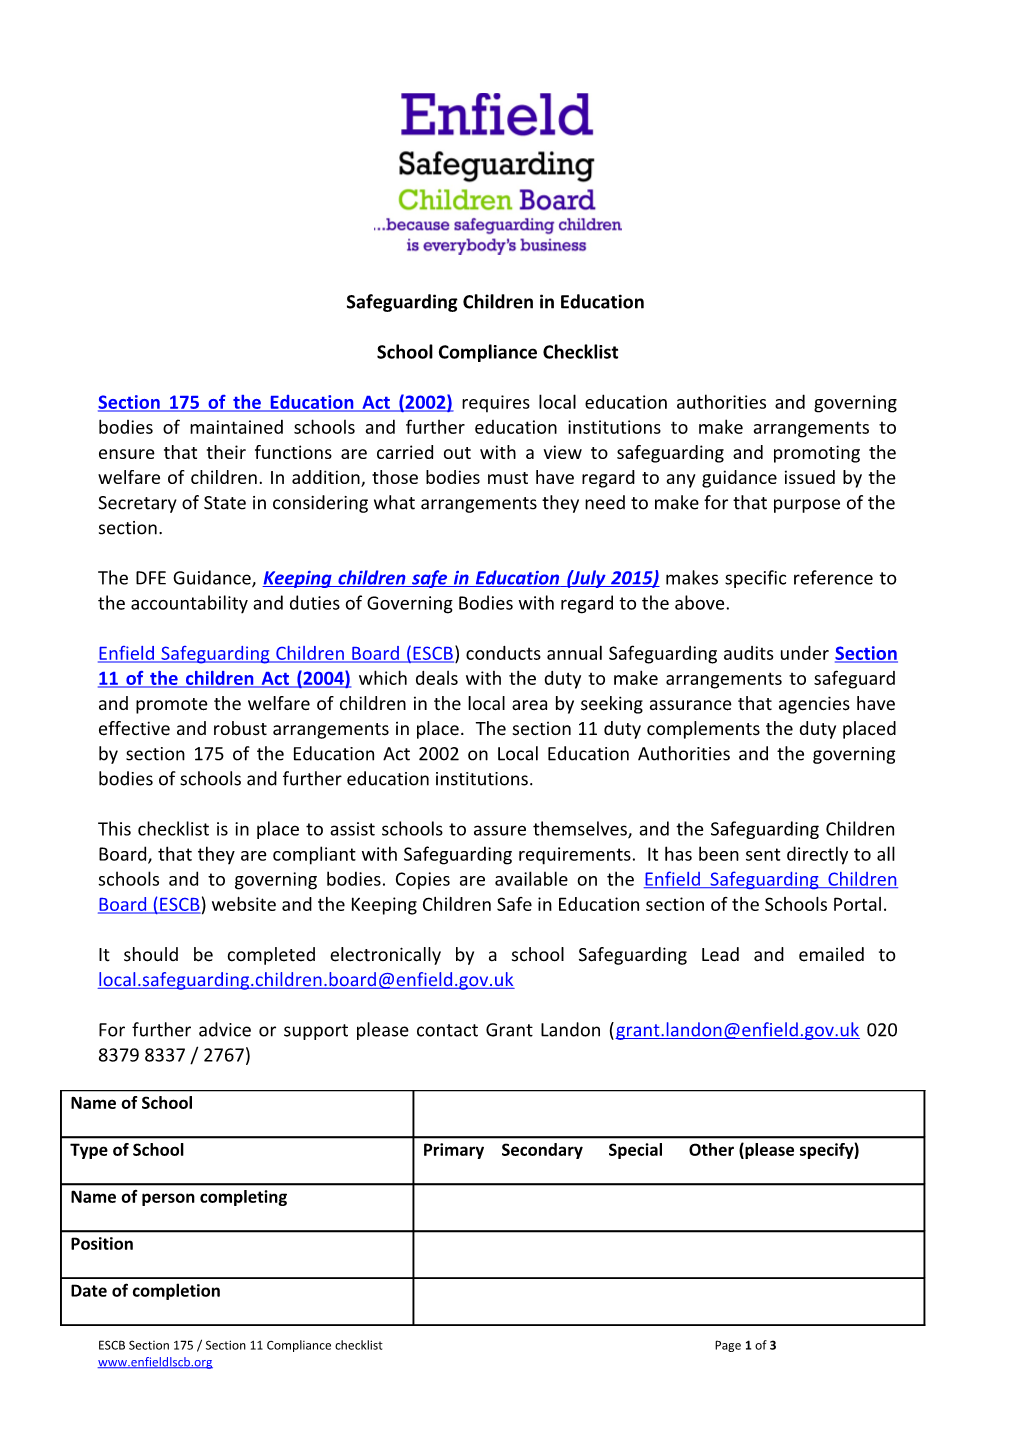 Termly Reporting of Statistics 07/08